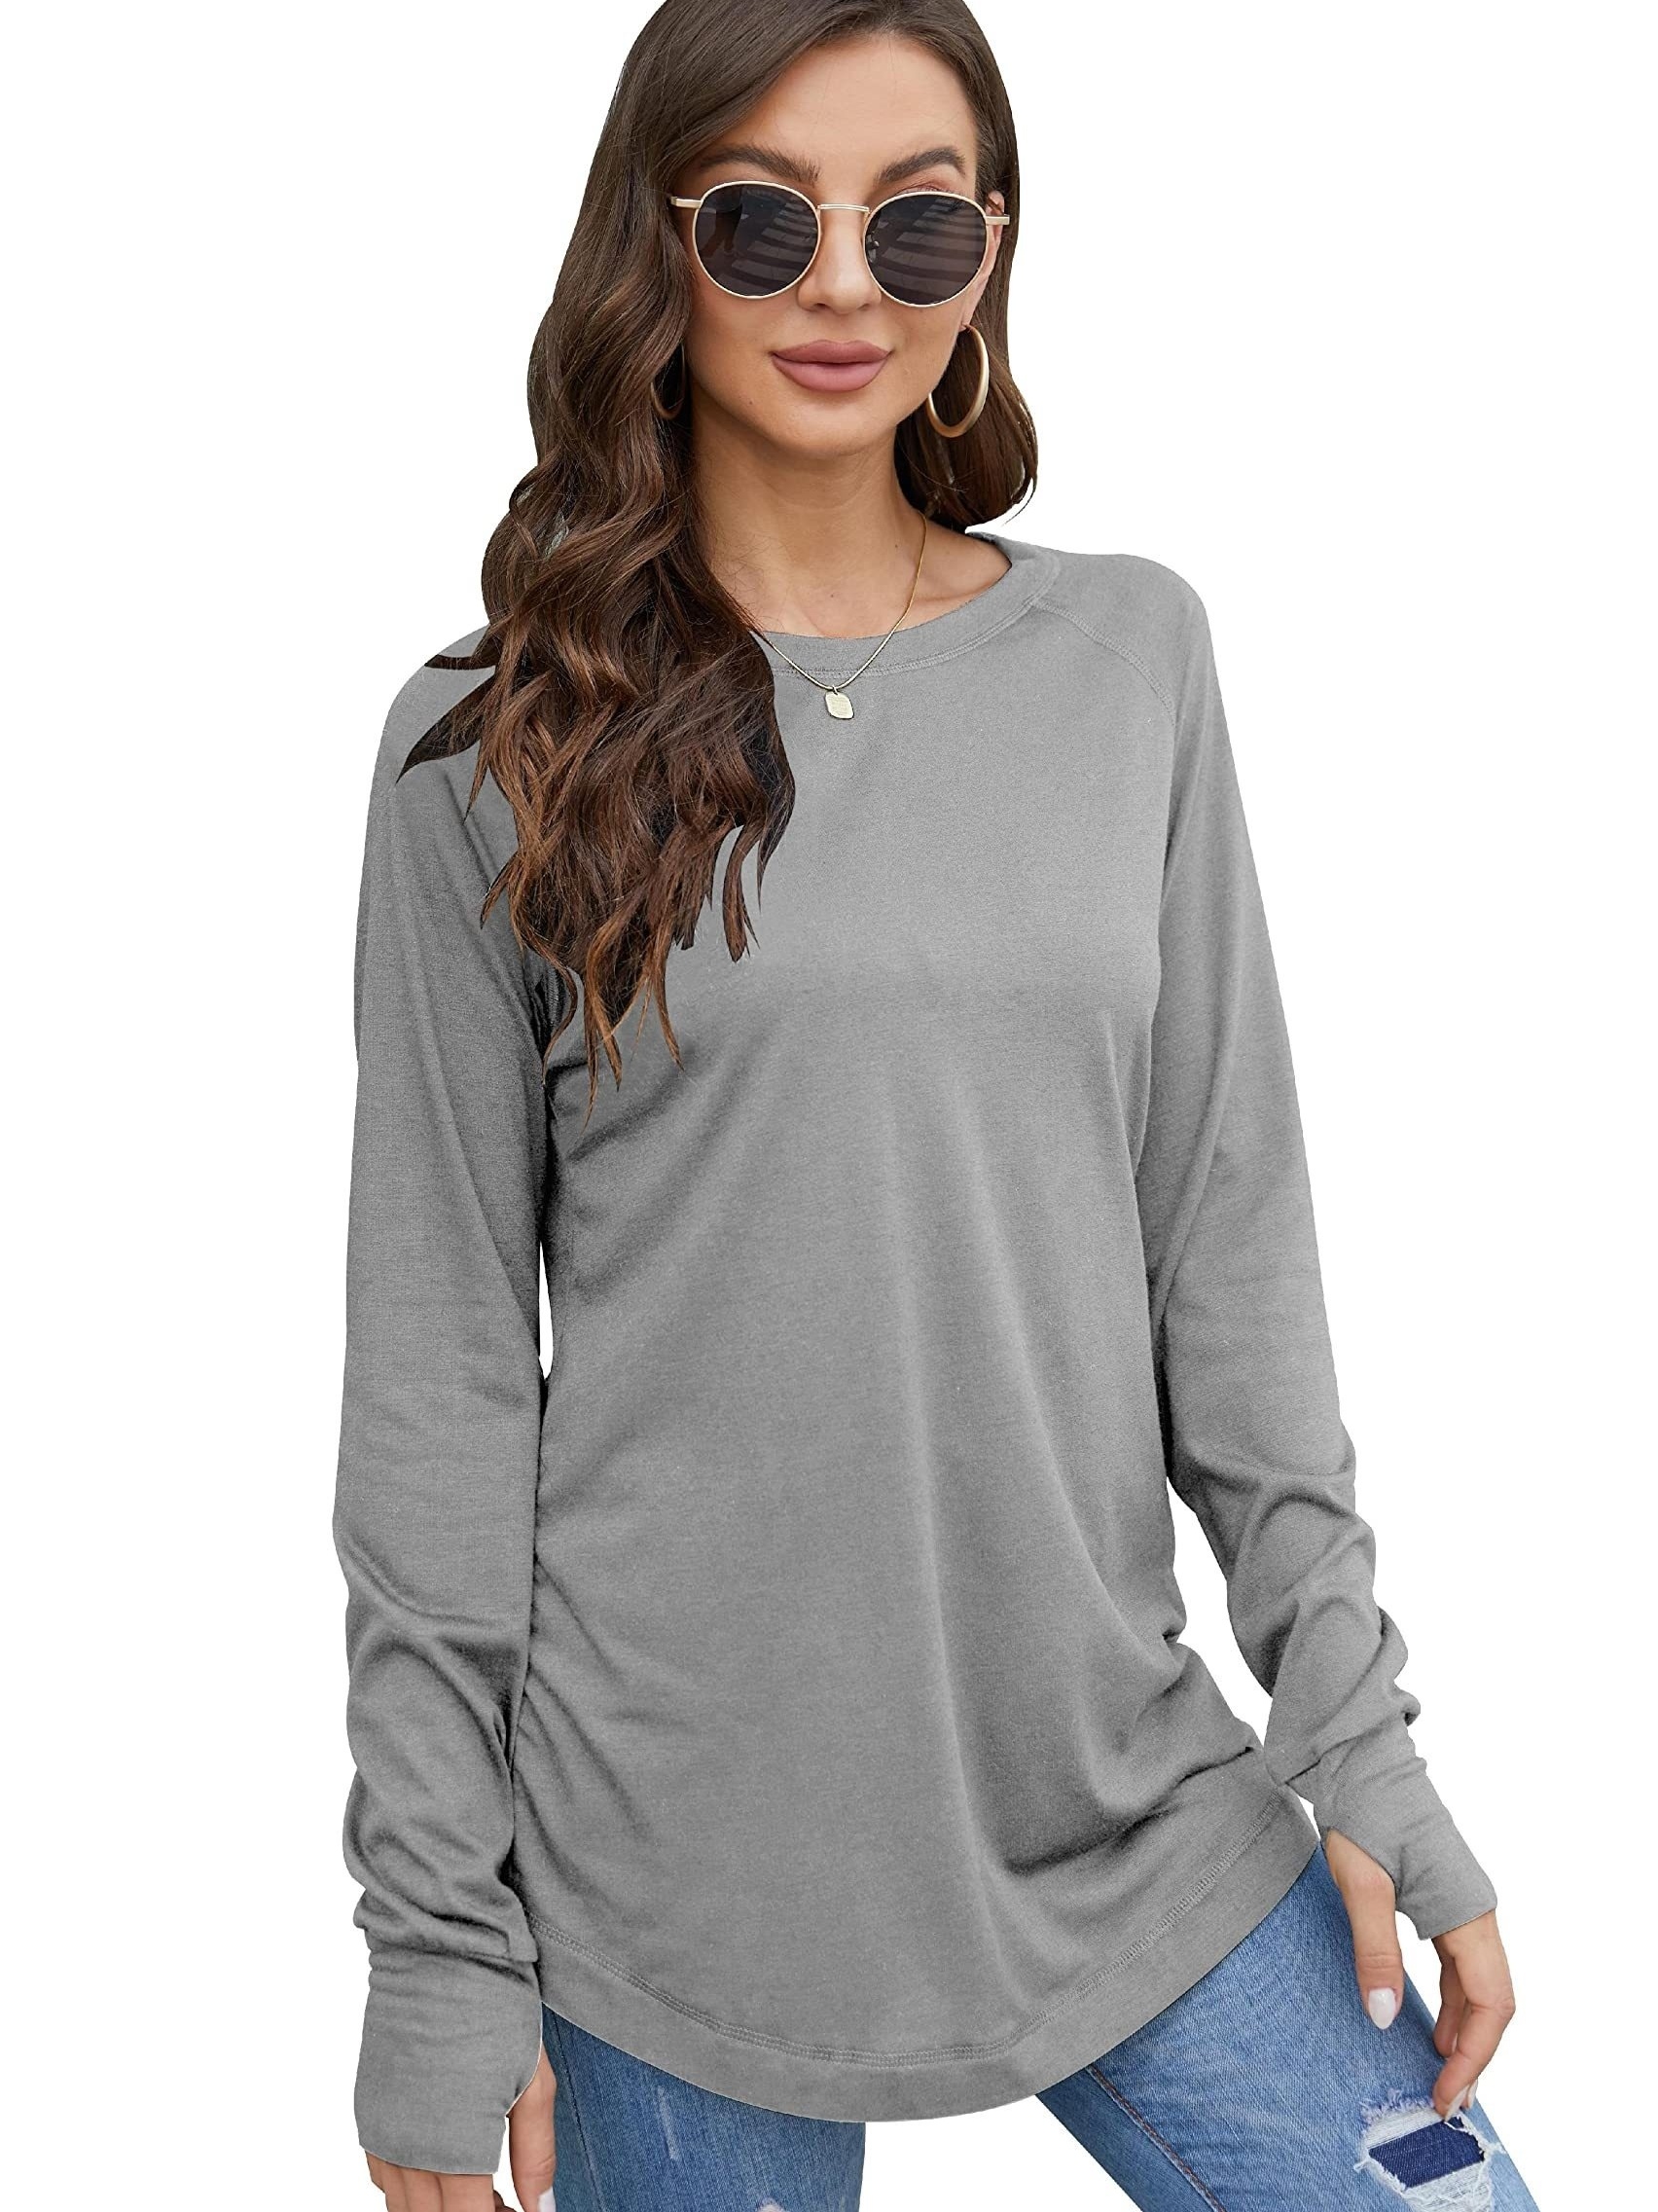 Womens Long Sleeve Tunic Tops for Leggings Casual Pullover Crew